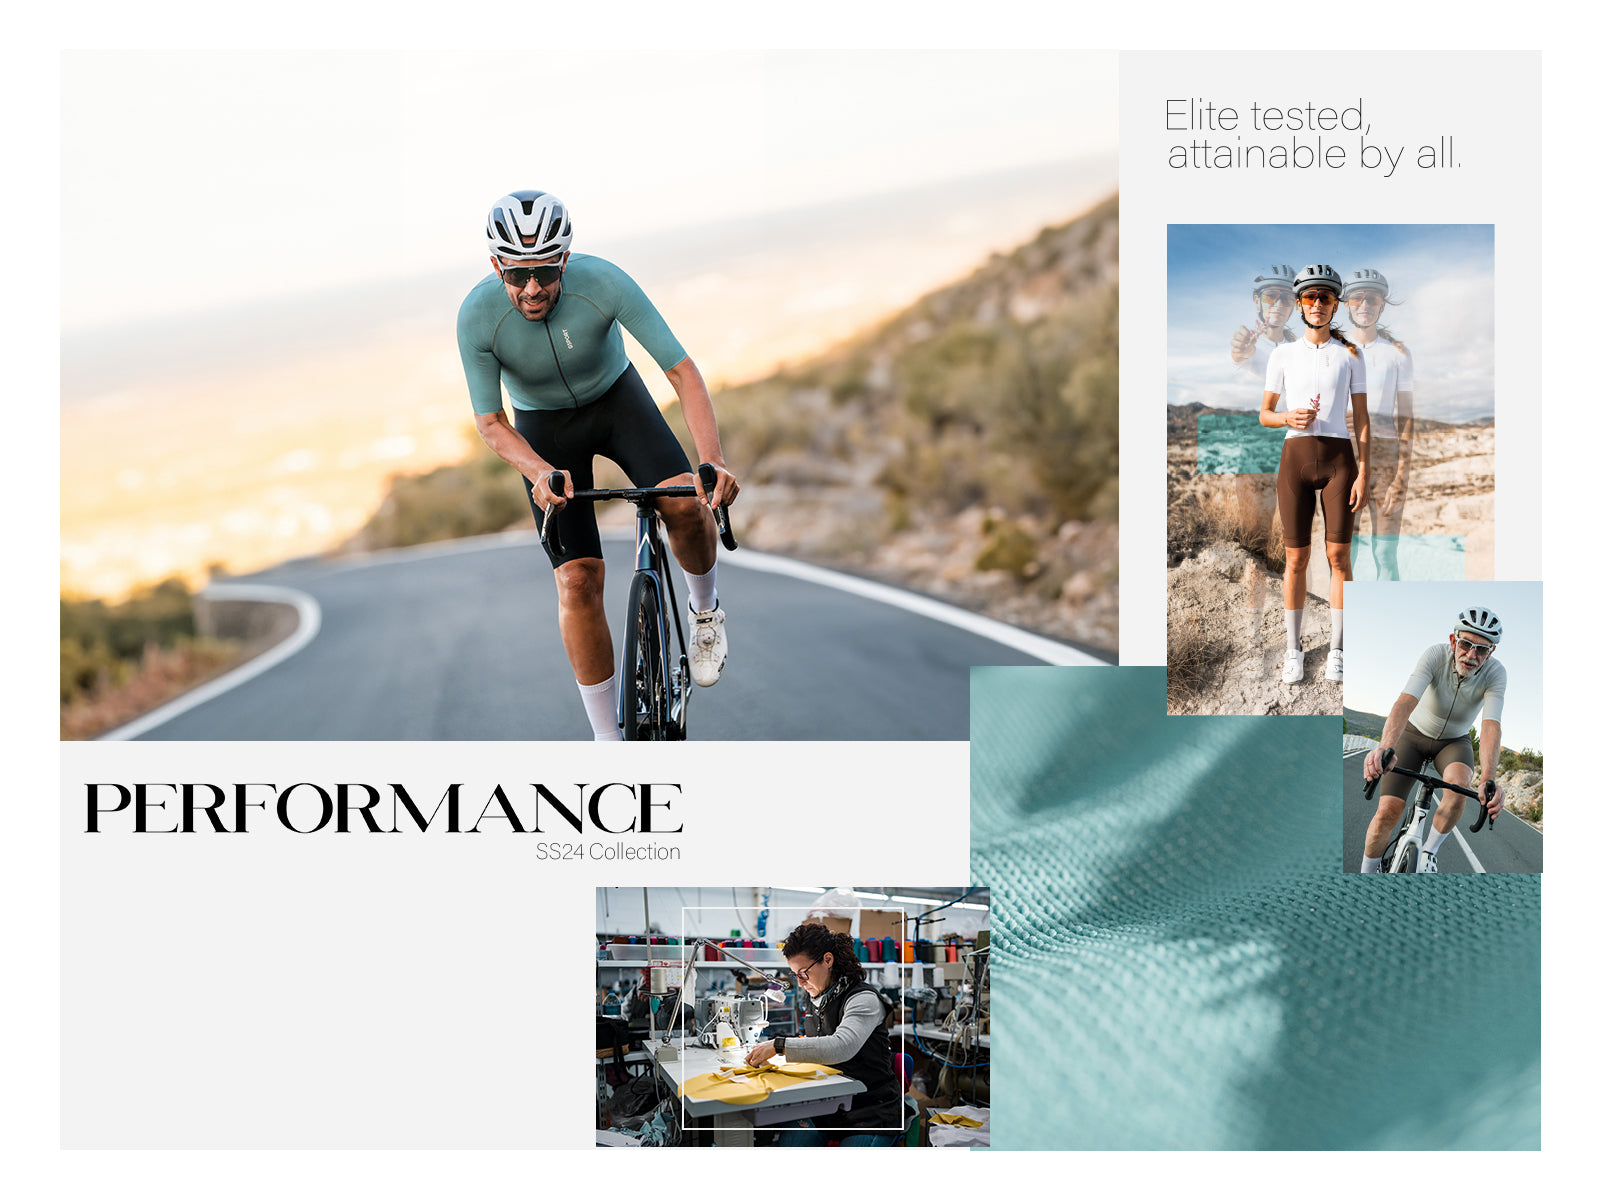 PERFORMANCE - ELITE TESTED, ATTAINABLE BY ALL